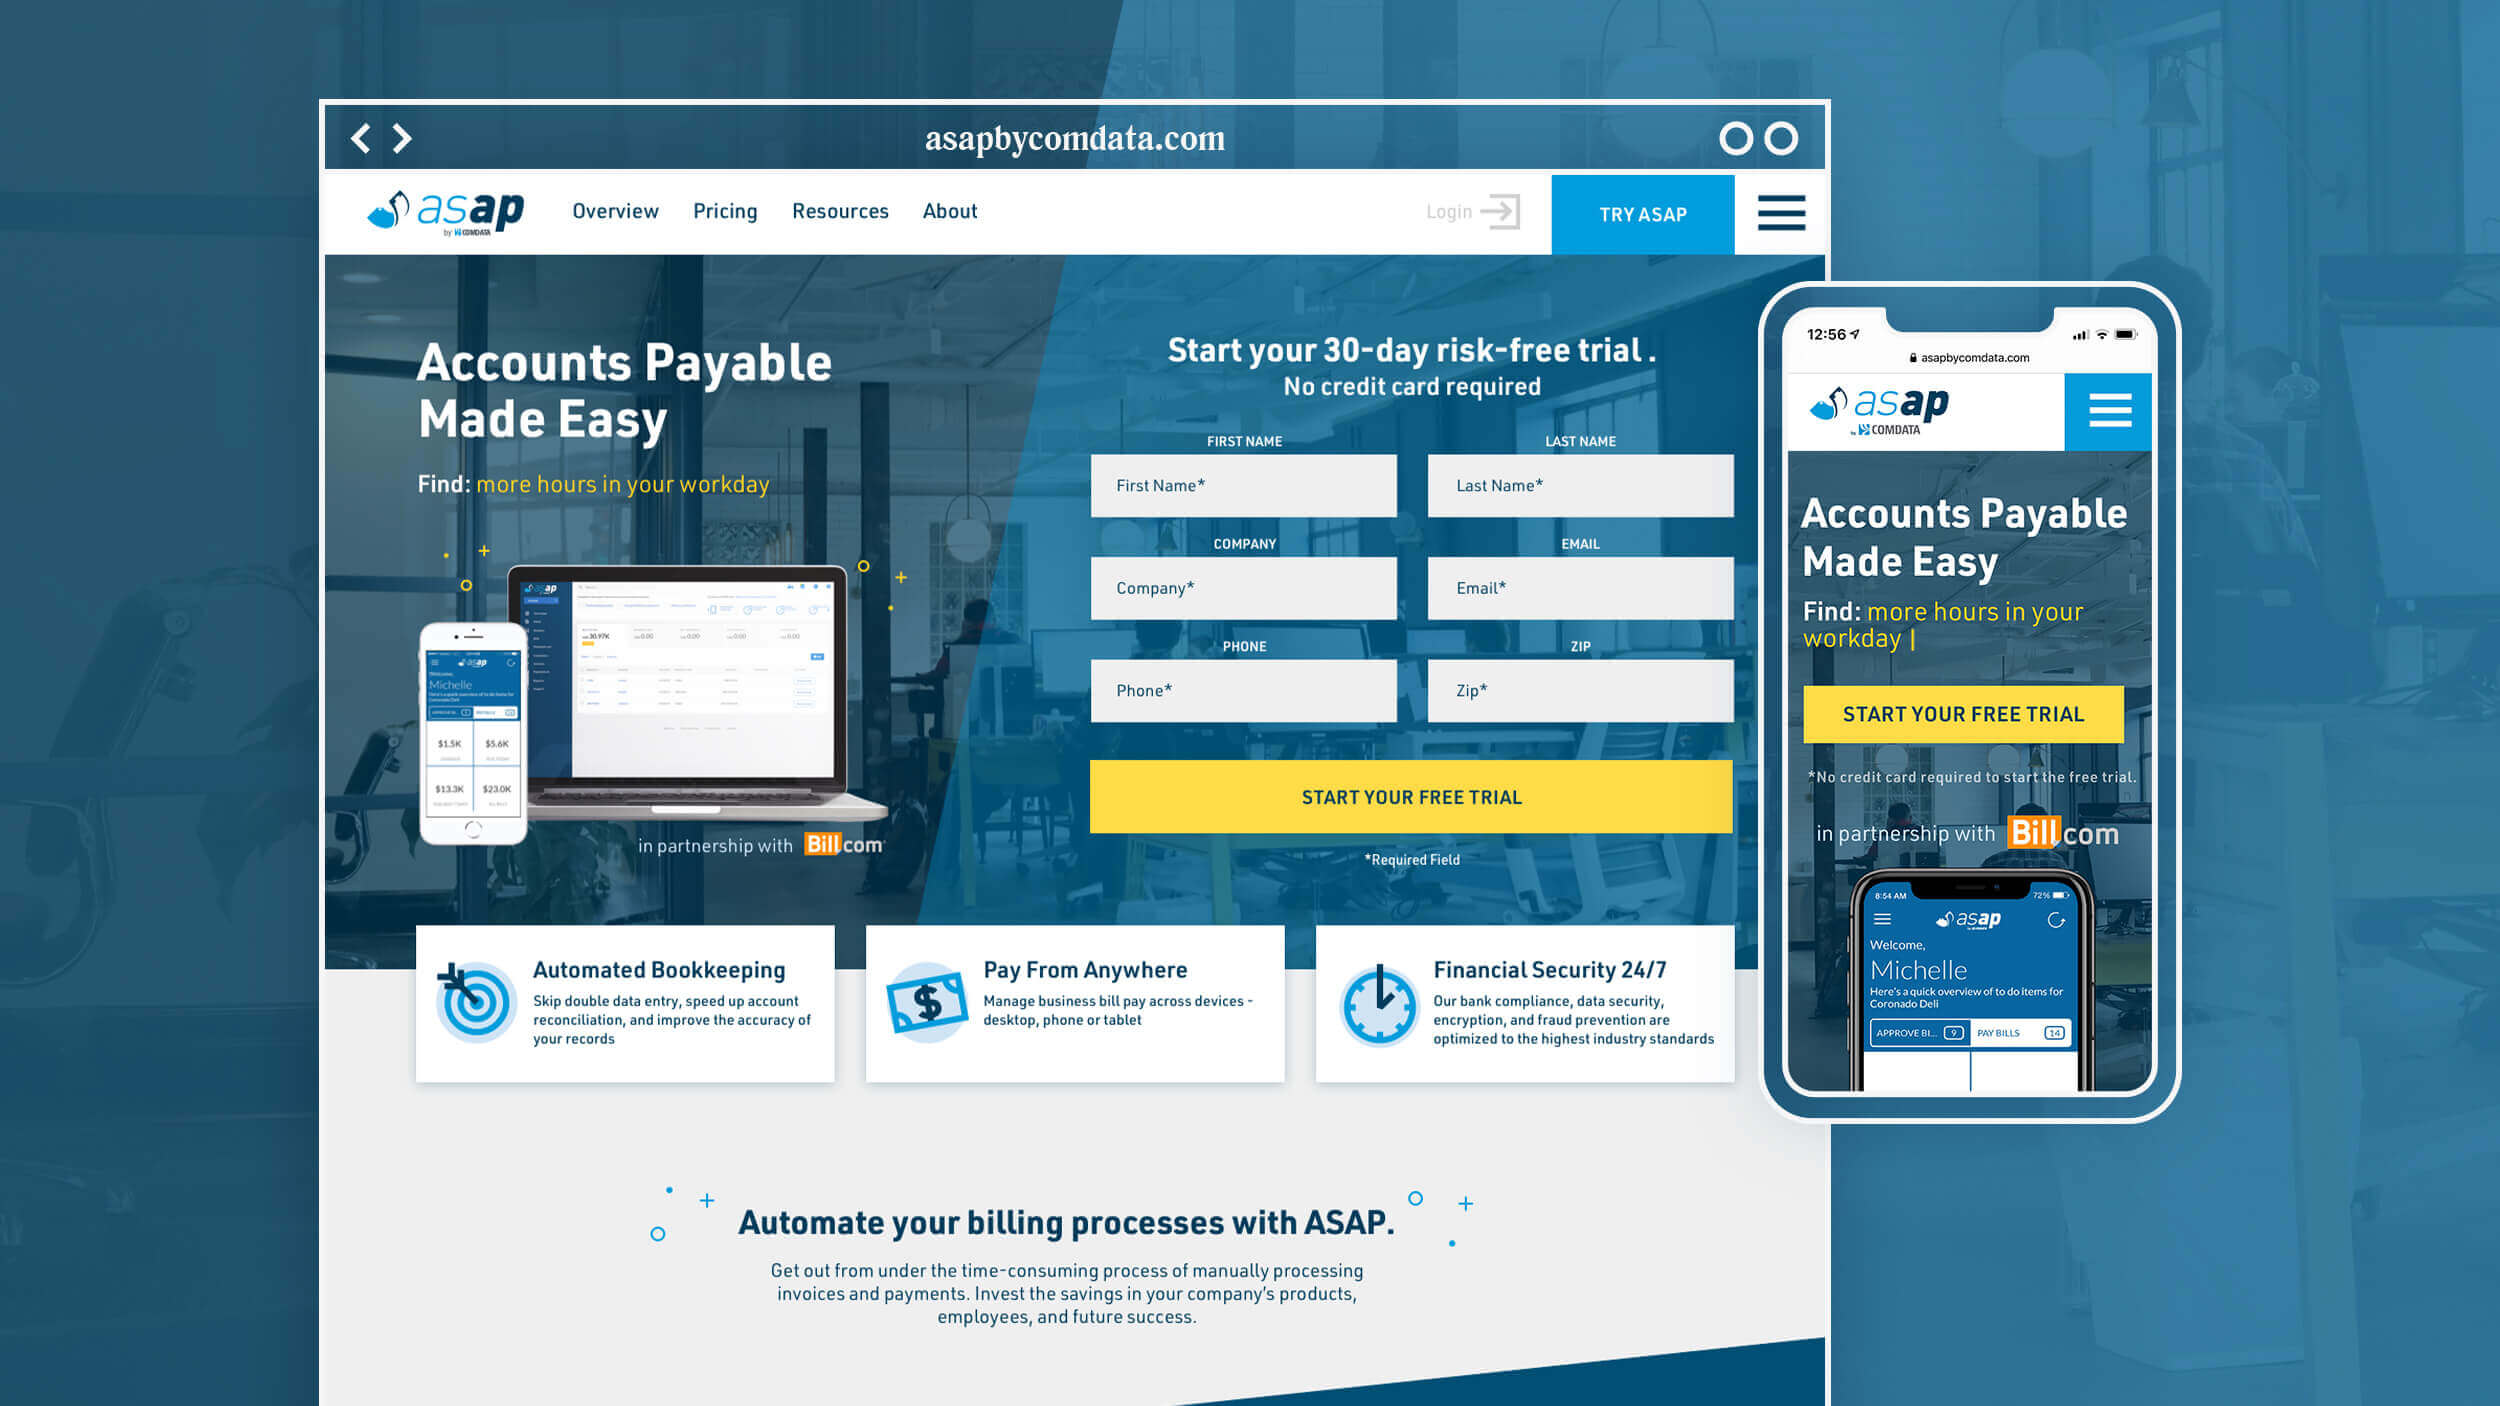 Homepage responsive design on the ASAP by Comdata website